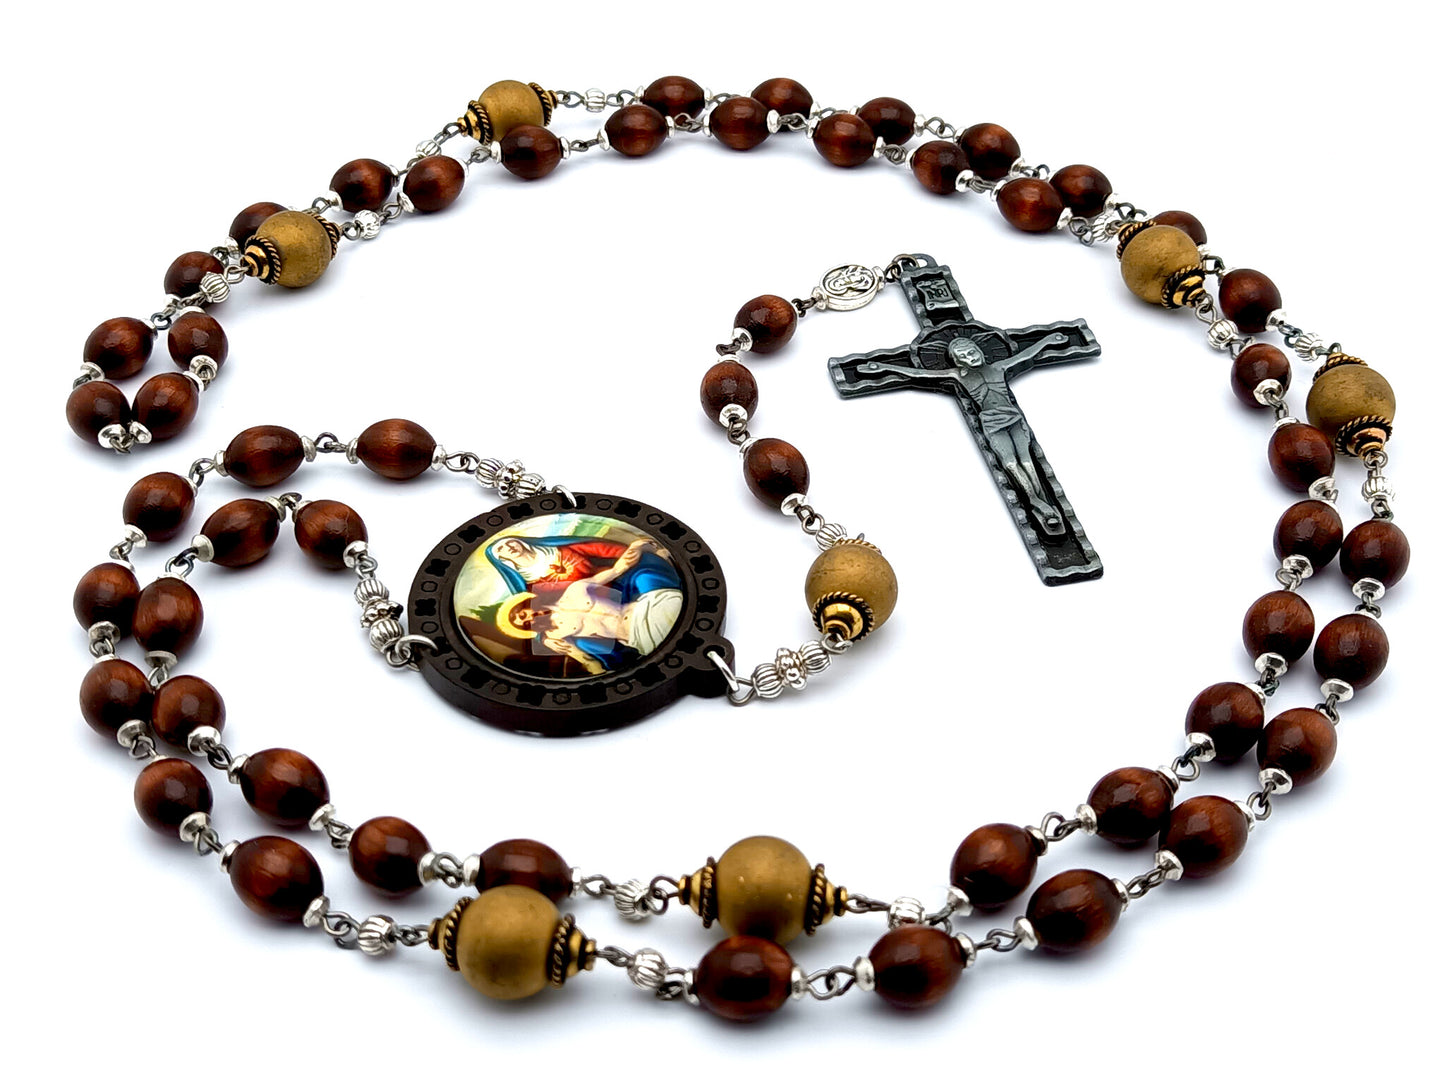 Our Lady of Sorrows unique rosary beads dolor rosary with wooden and gold glass beads, pewter crucifix and picture centre medal.